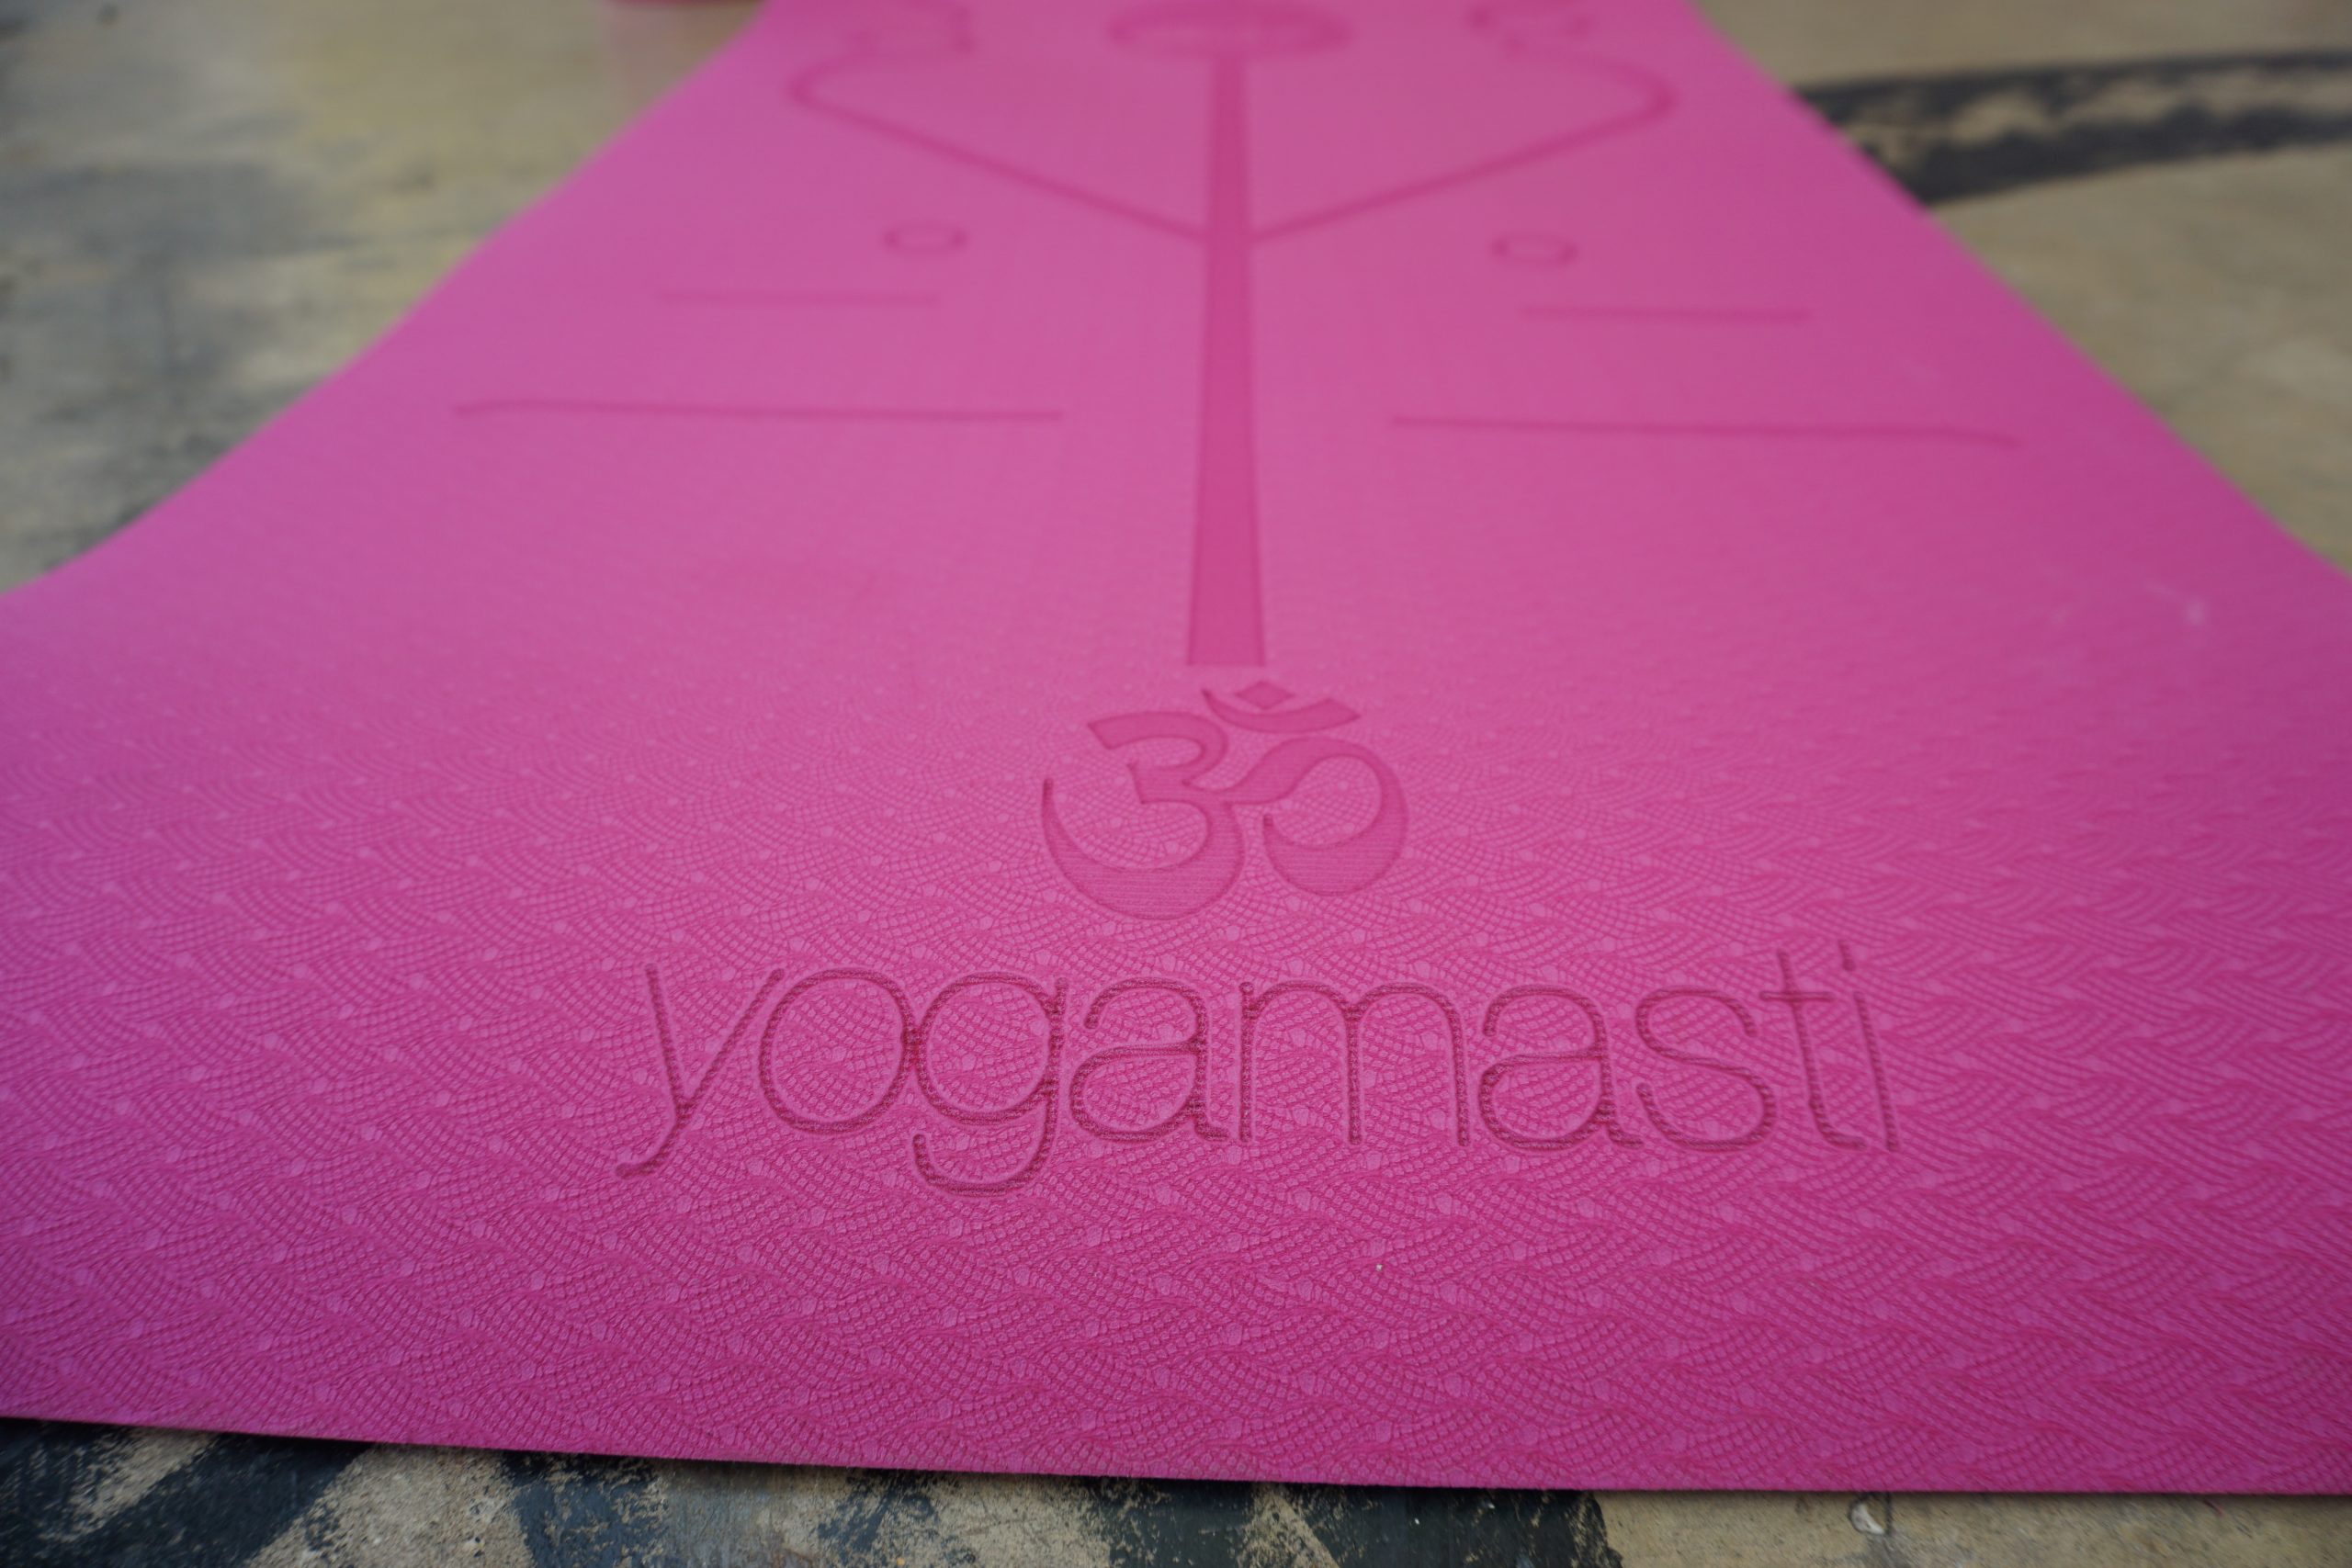 Yogamasti Pink Alignment Non Slip Yoga Mat with a 6mm thickness and engraved alignment aids